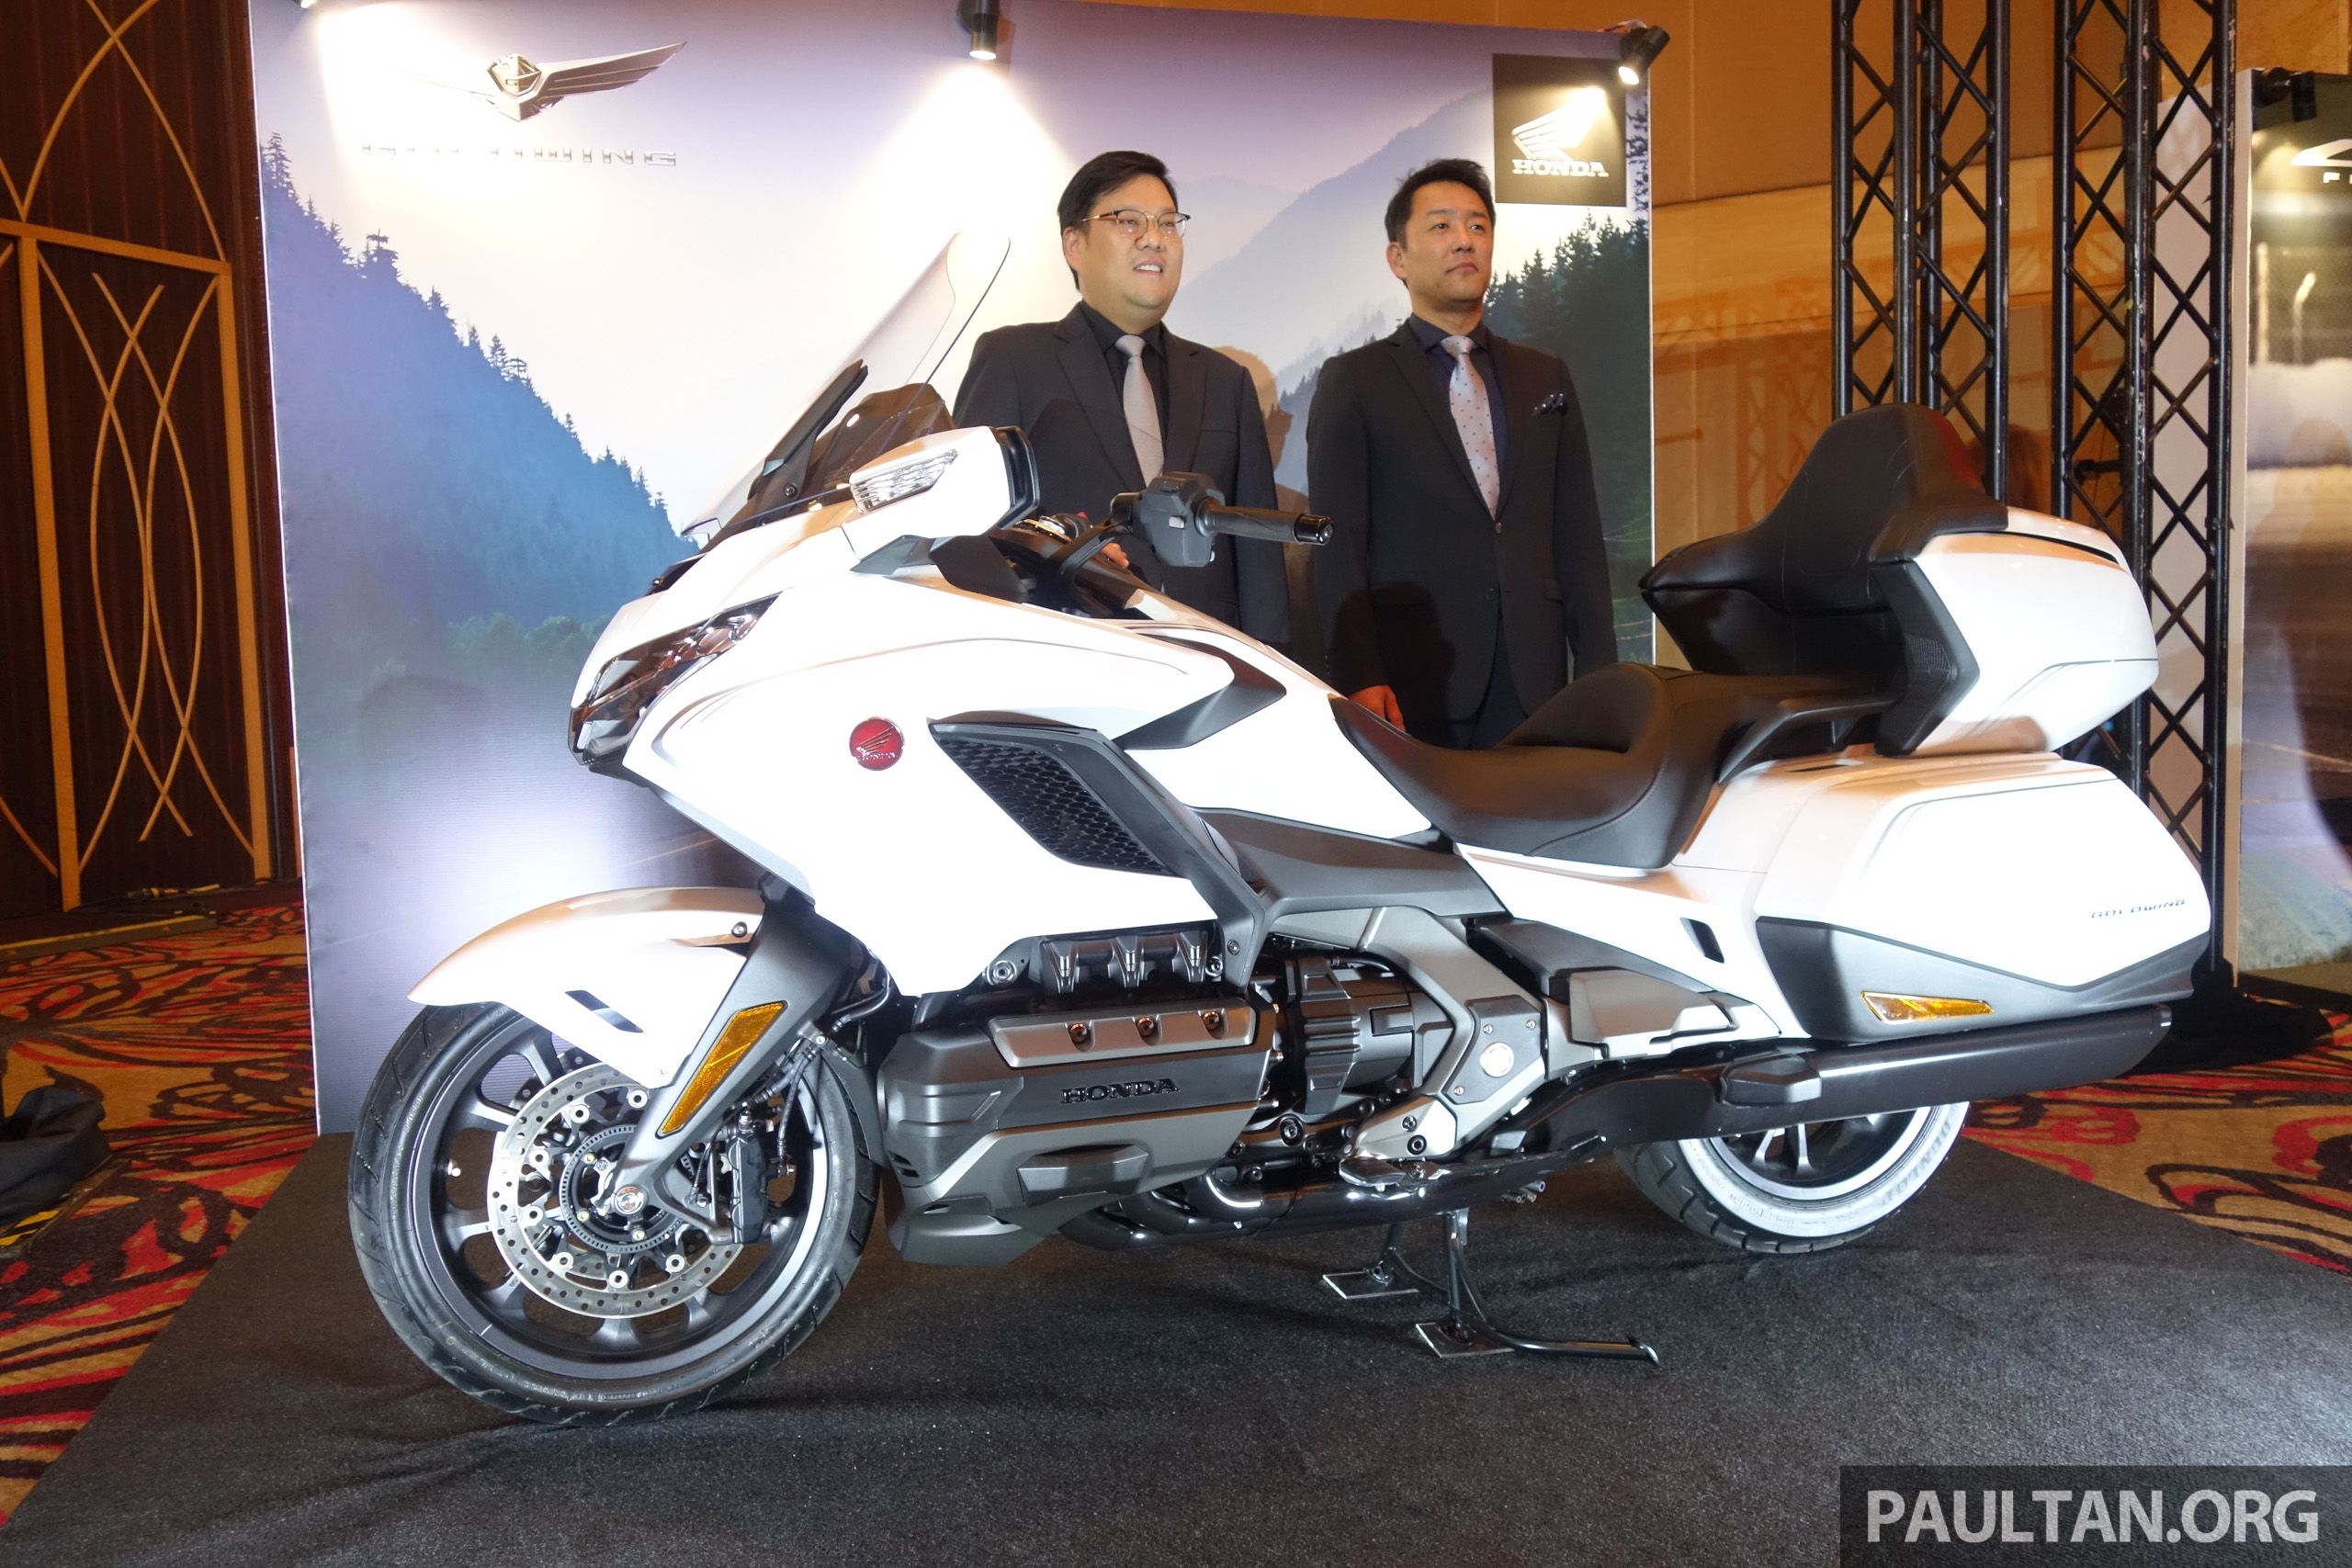 Honda Big Wing Launches 2020 Honda Gl1800 Gold Wing And Crf1100l Africa Twin In M Sia From Rm98k Paultan Org